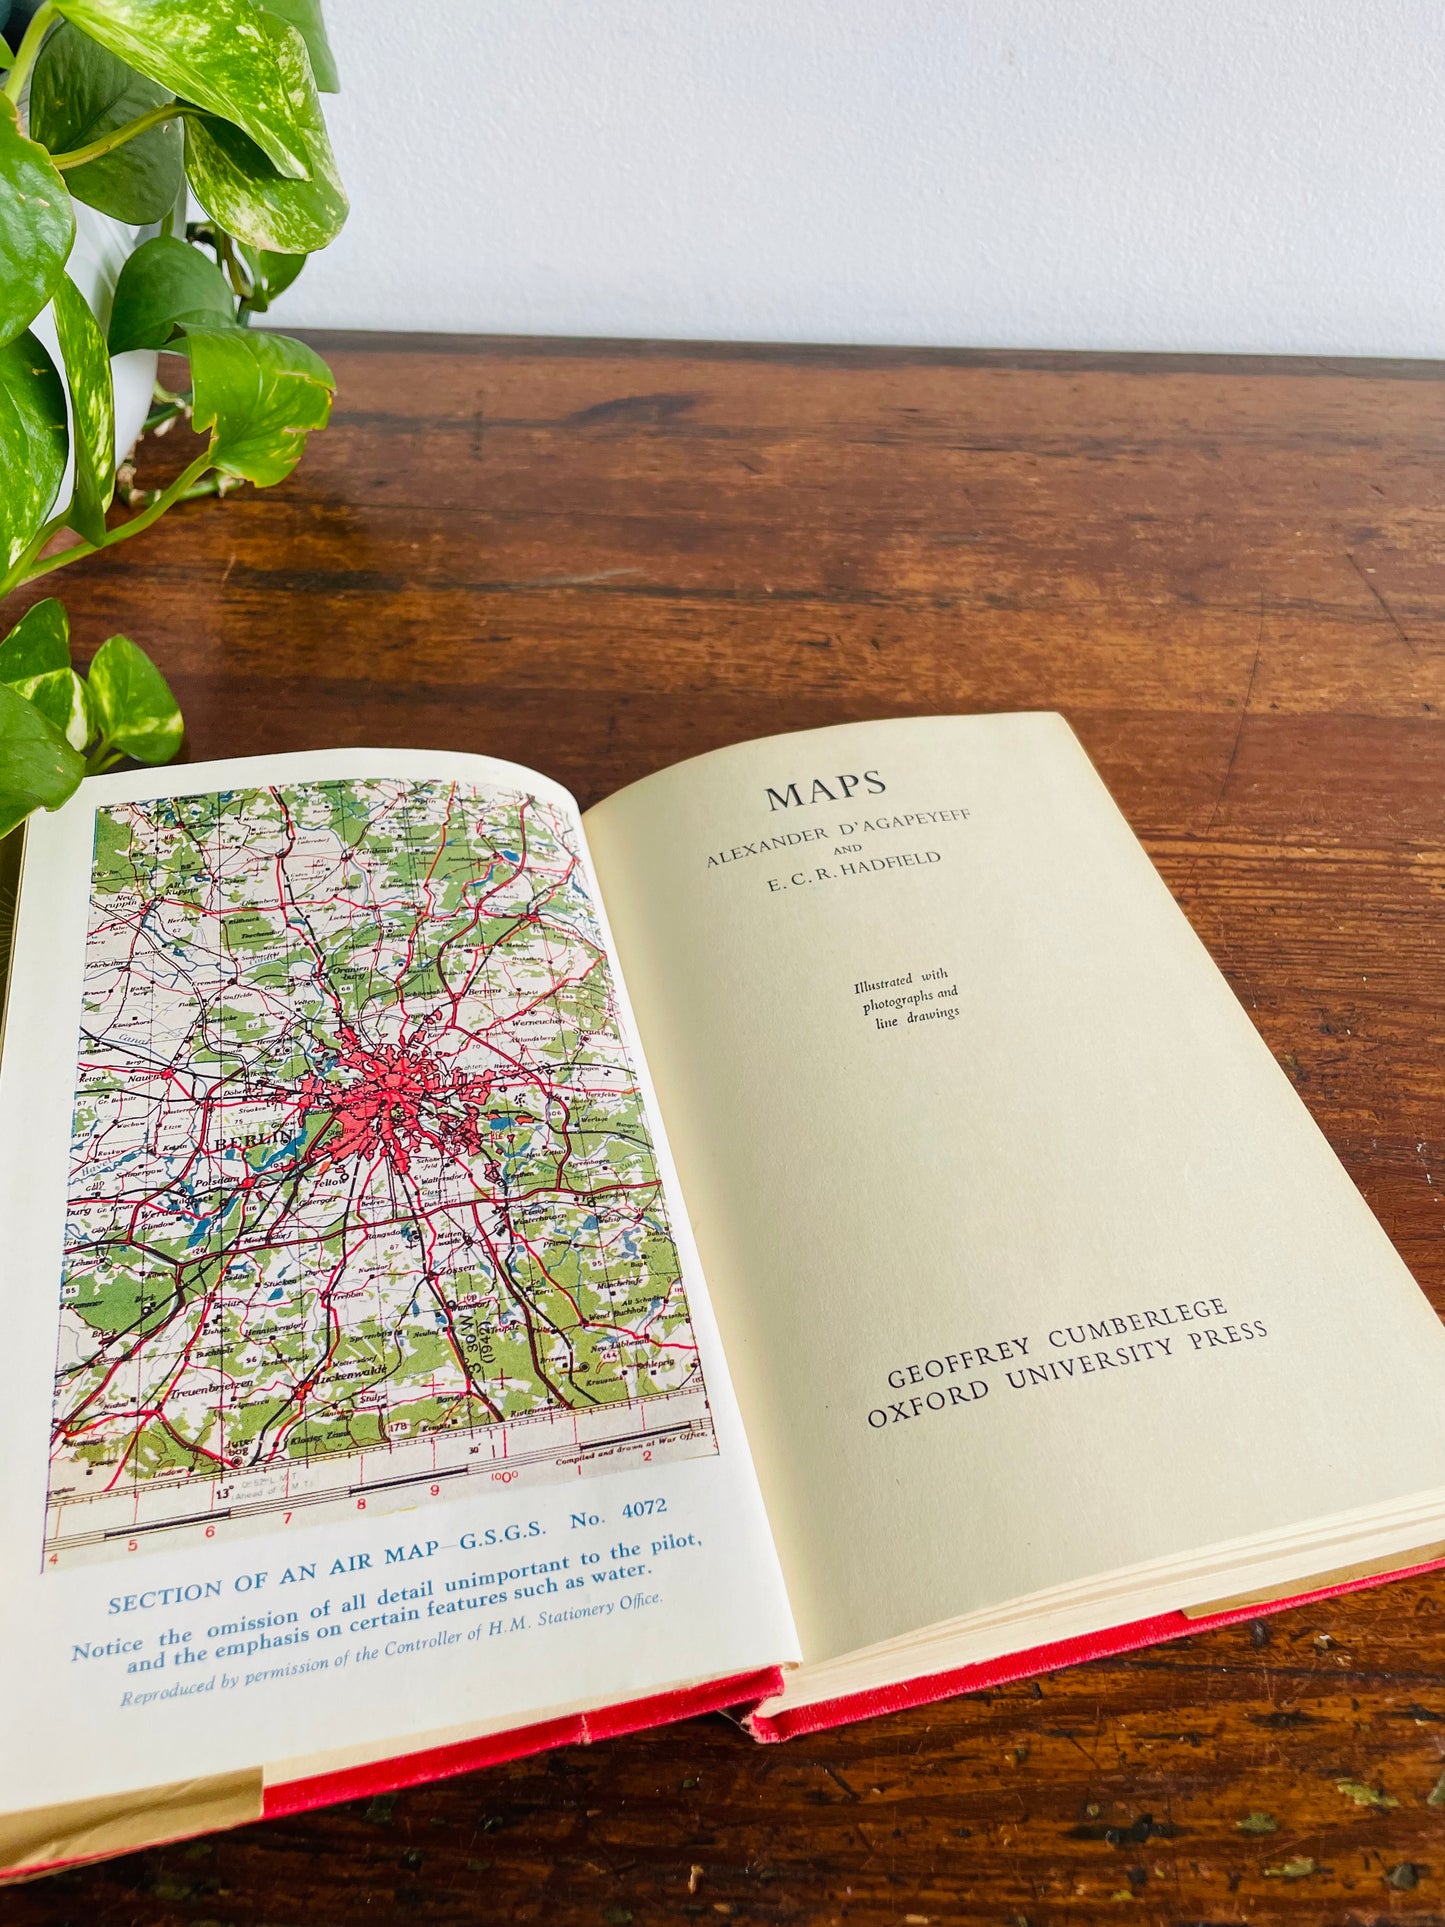 Compass Books - Maps by Alexander D'Agapeyeff & E. C .R. Hadfield - Clothbound Hardcover Book (1953) - History of Map-Making